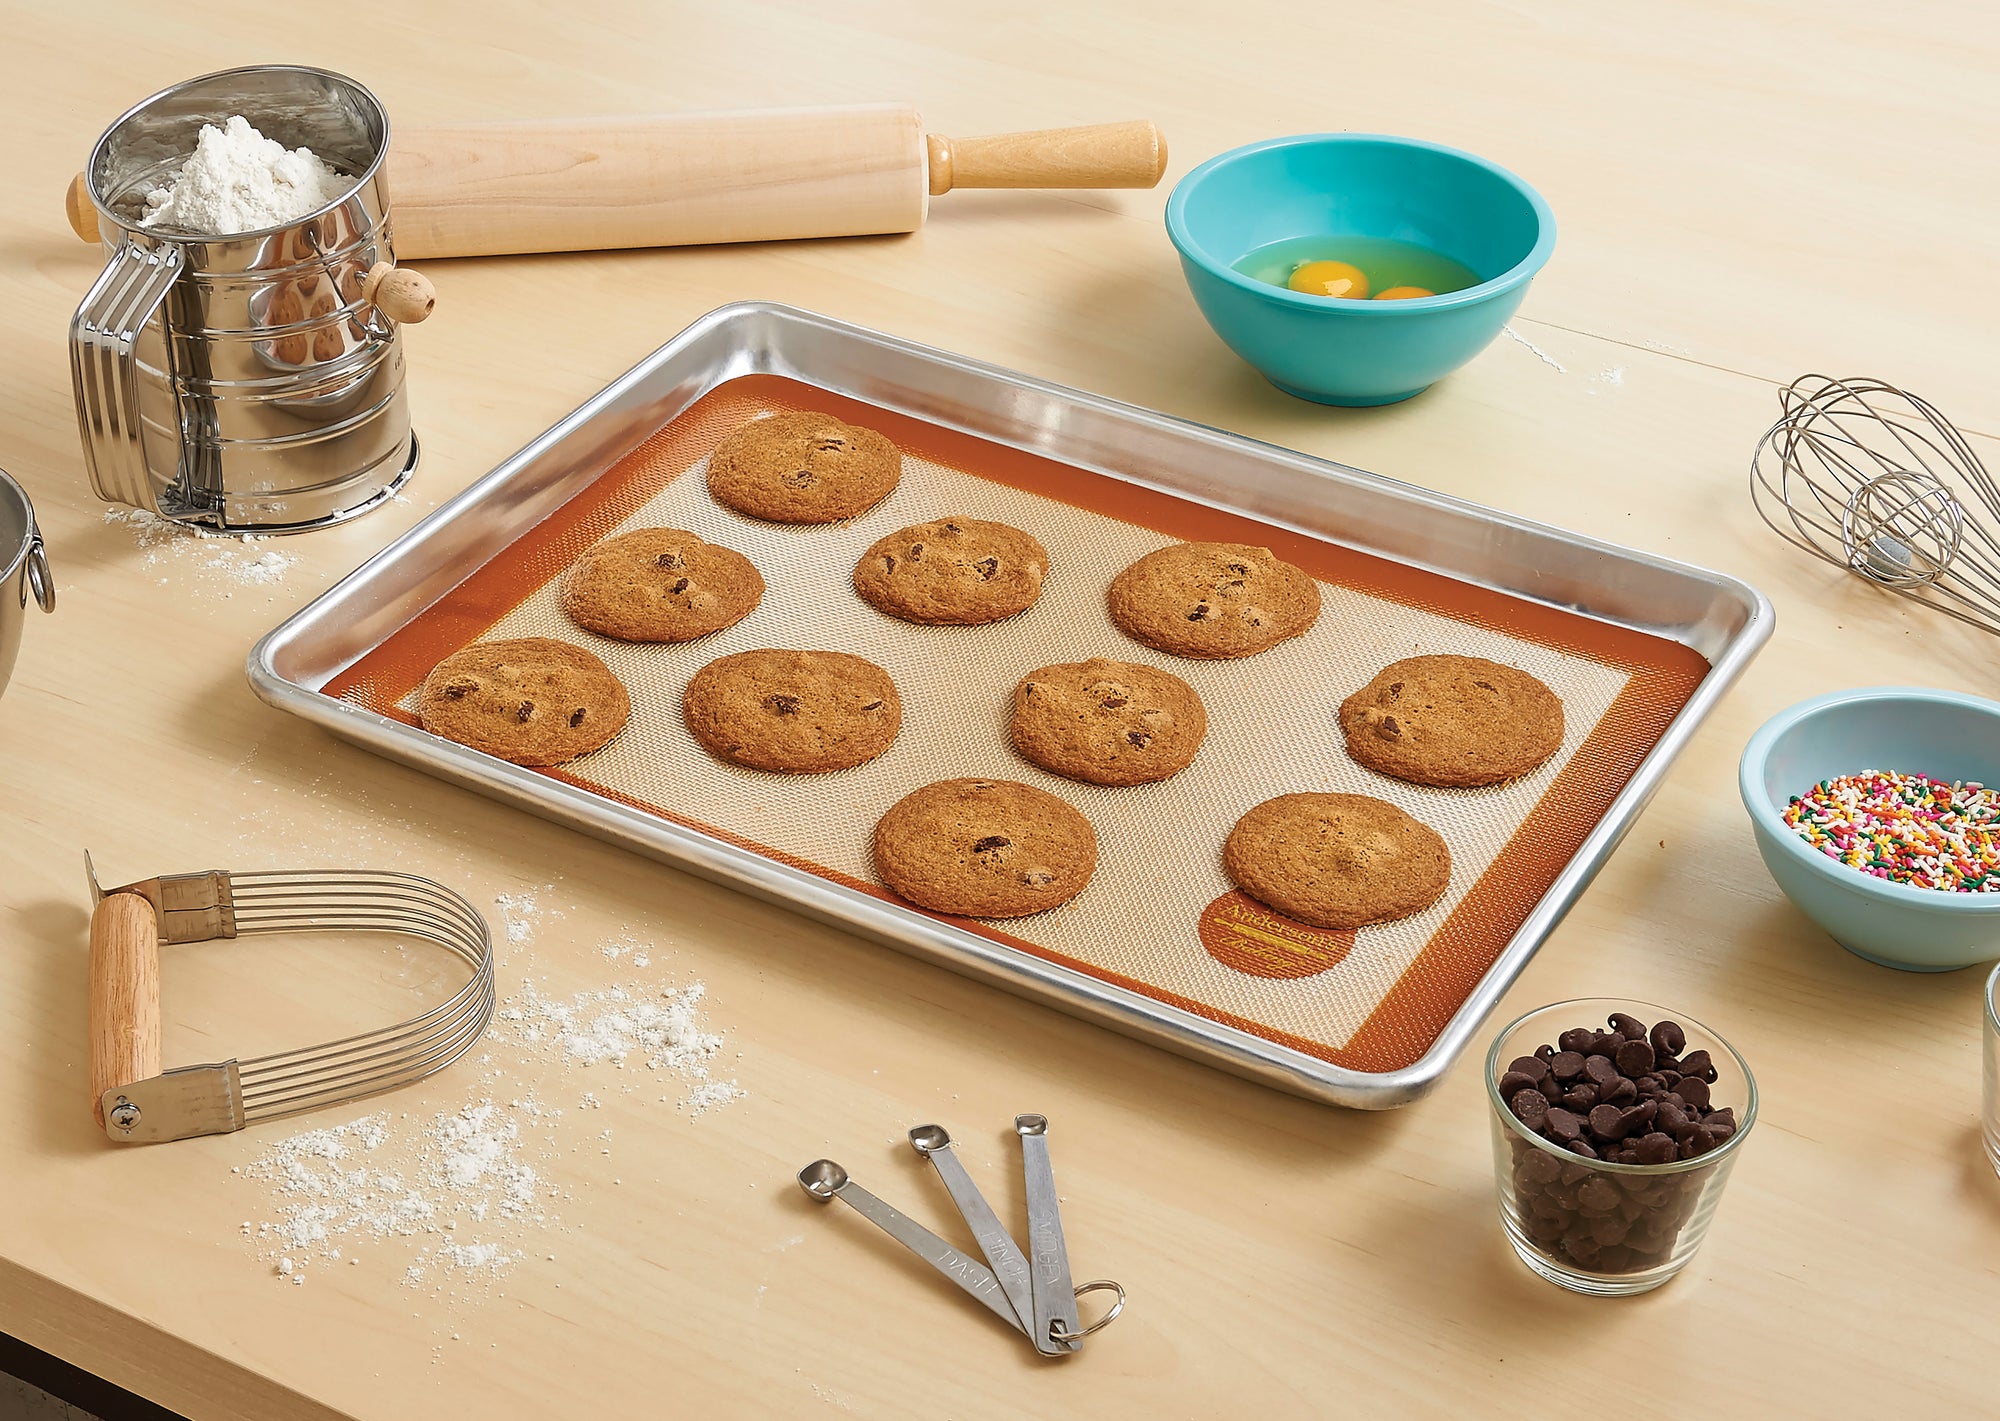 https://cdn.shopify.com/s/files/1/0989/9404/products/0030531_mrs-andersons-baking-half-size-silicone-baking-mat-hangable-box_2000x.jpg?v=1505330479